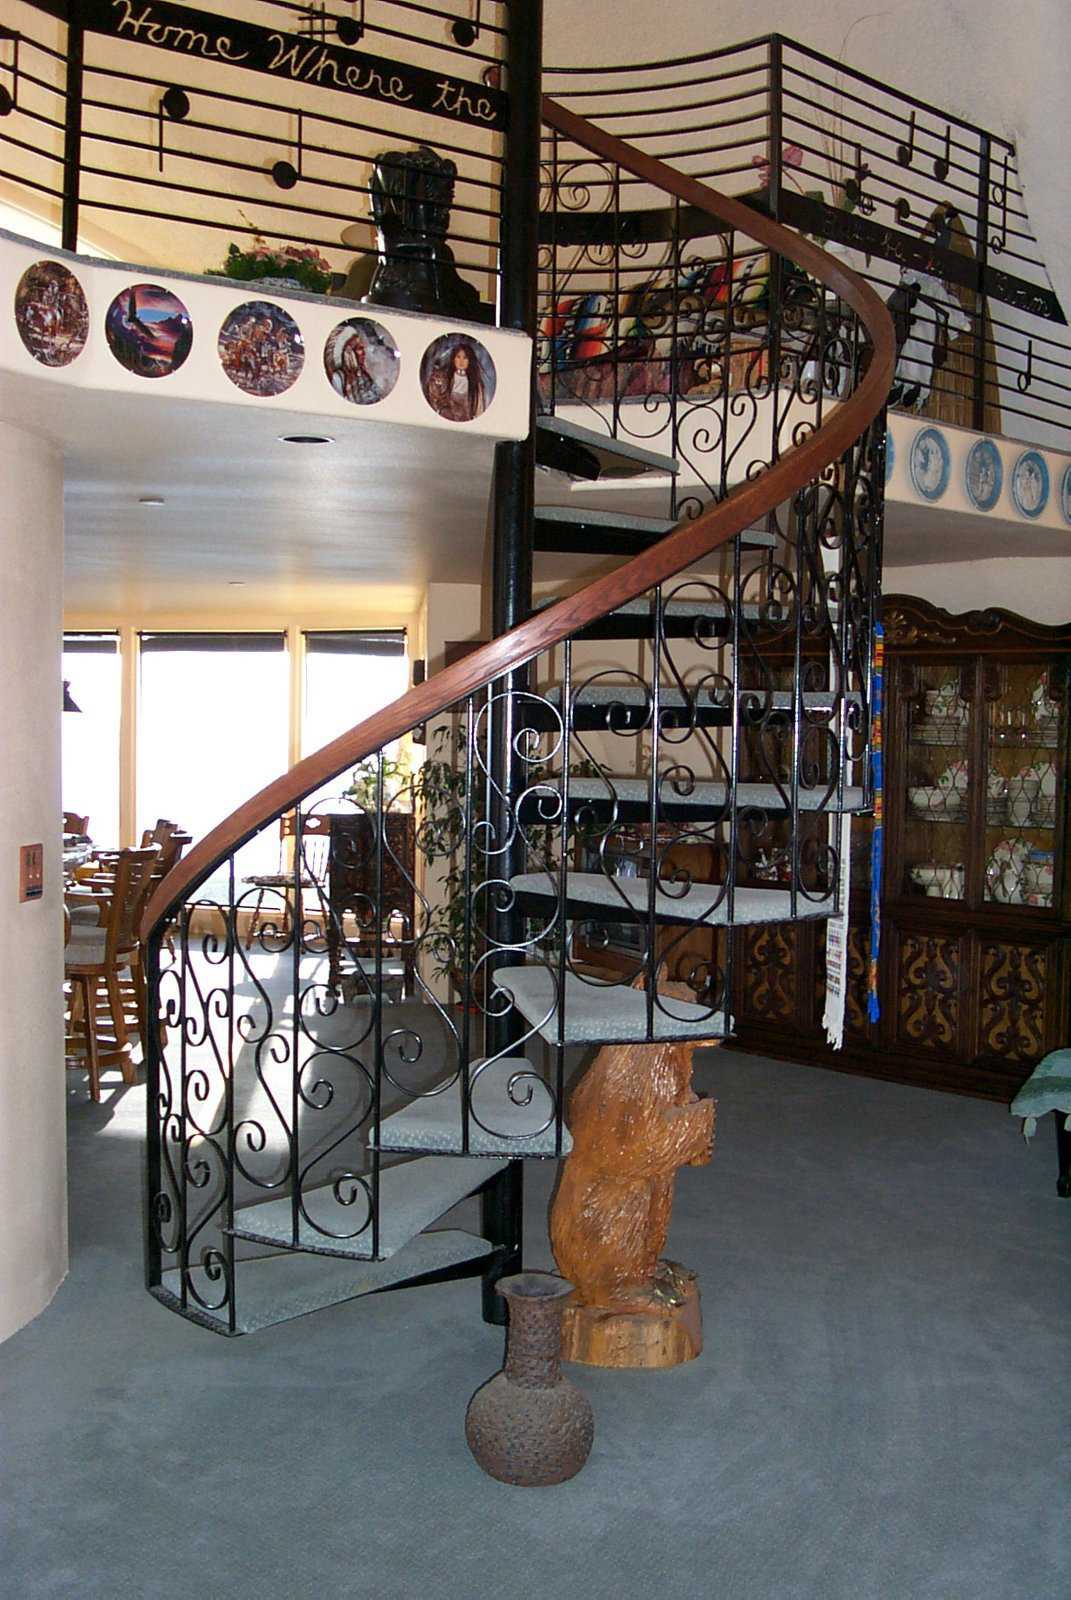 Musical Banister — It’s a giant music sheet: “Oh, Give me a home ….”